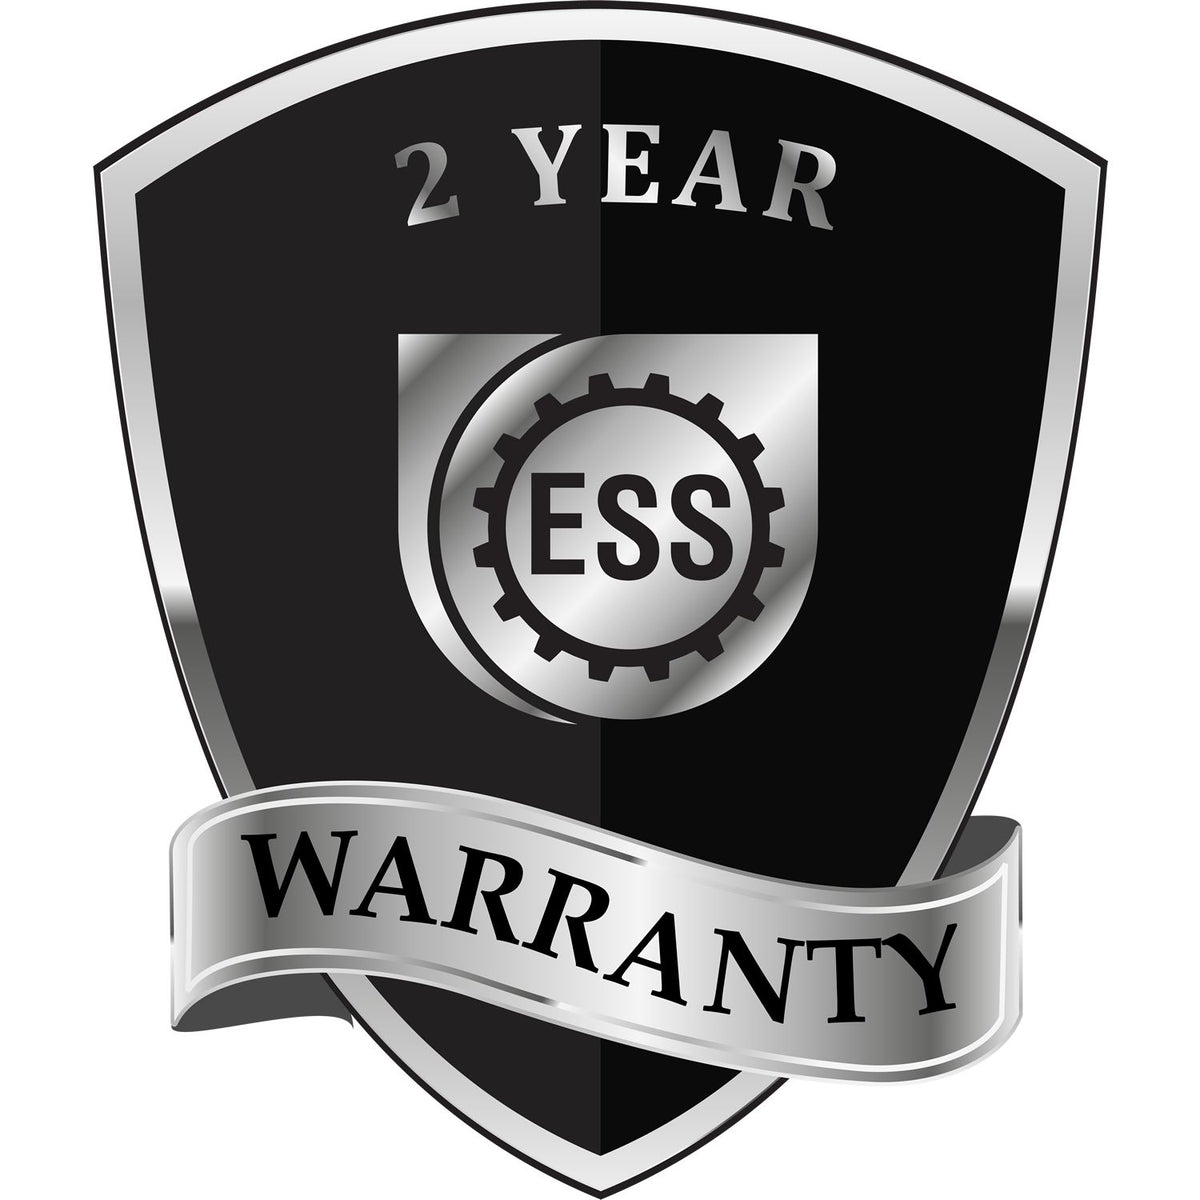 A badge or emblem showing a warranty icon for the Texas Desk Architect Embossing Seal